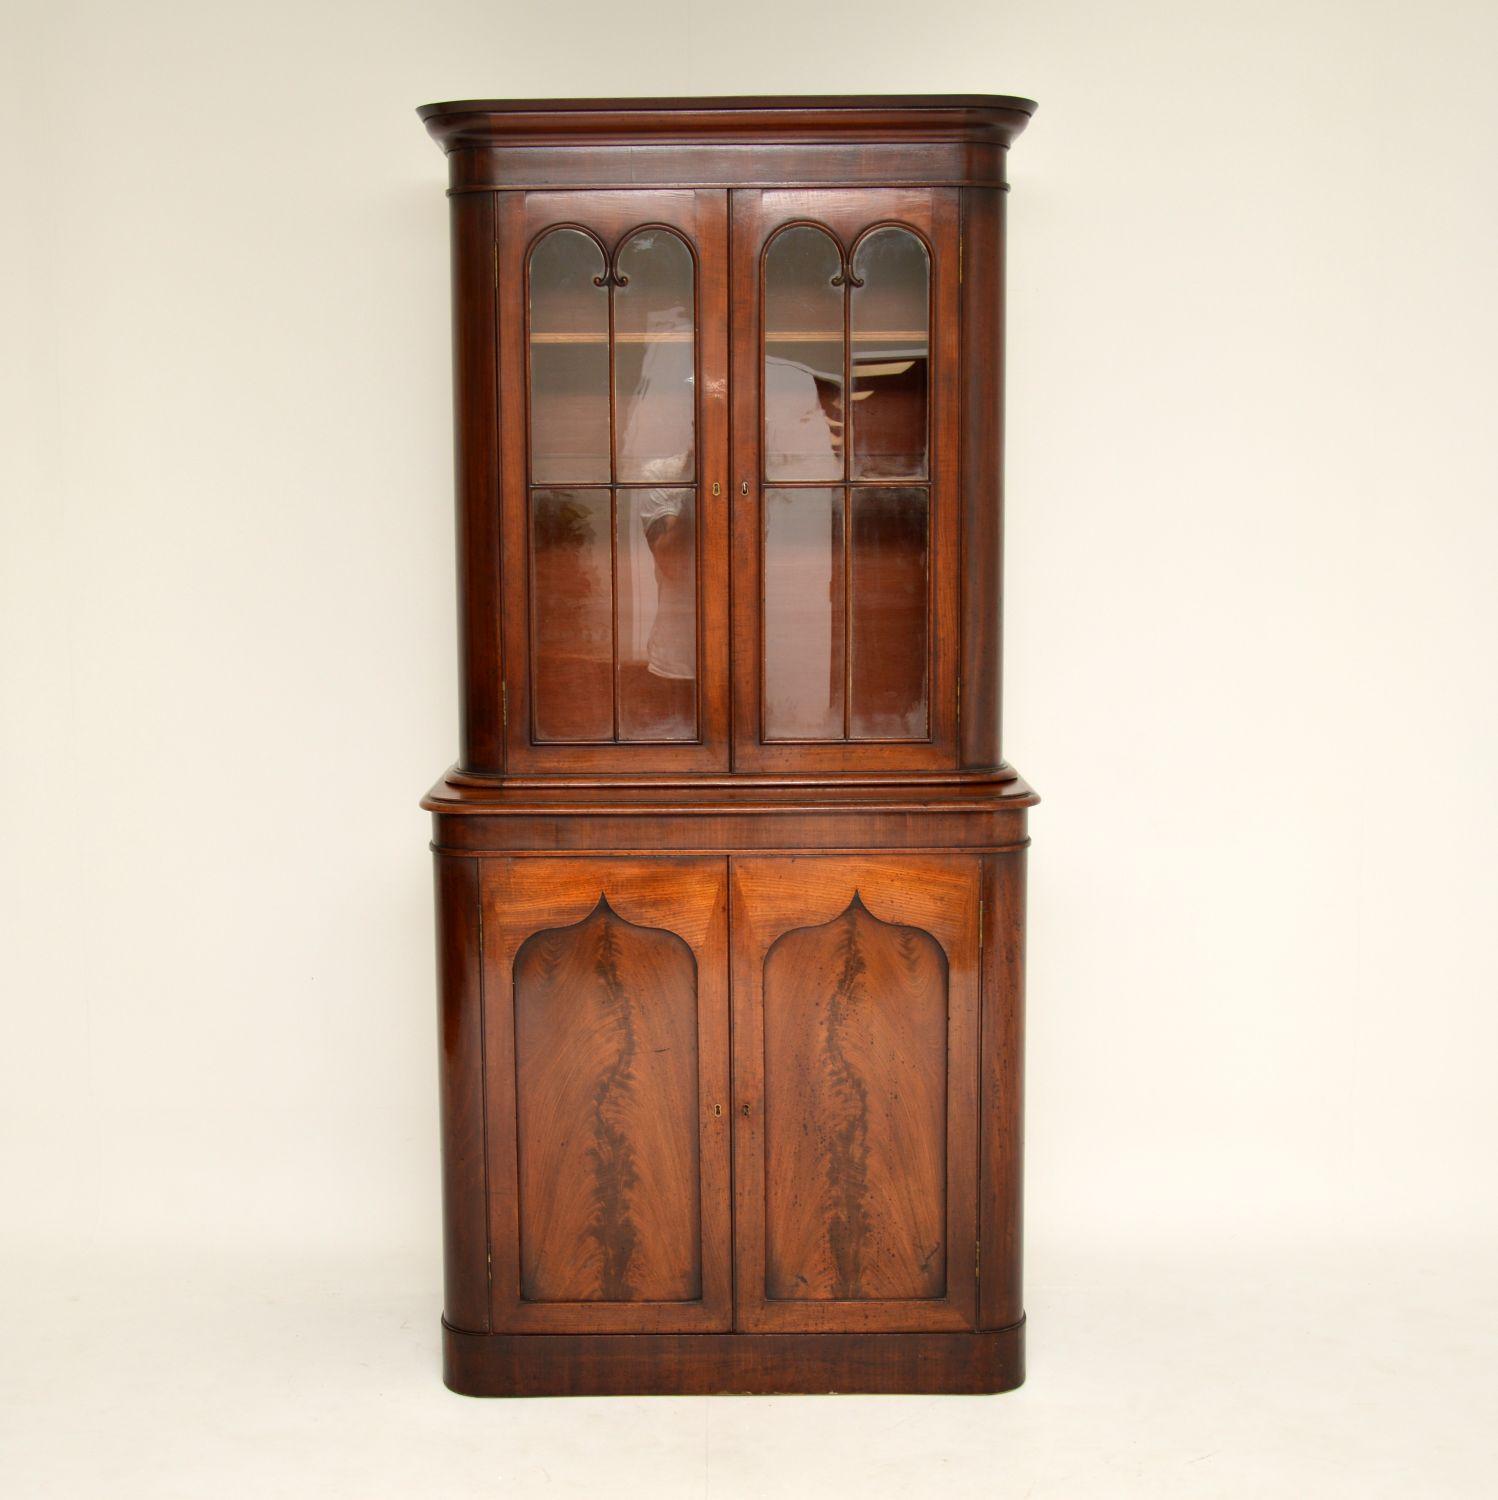 This antique William IV mahogany library bookcase is of extremely high quality and is in excellent original condition, with the warm color and nice patina, giving it plenty of character.

It has rounded corners all the way down and the top two